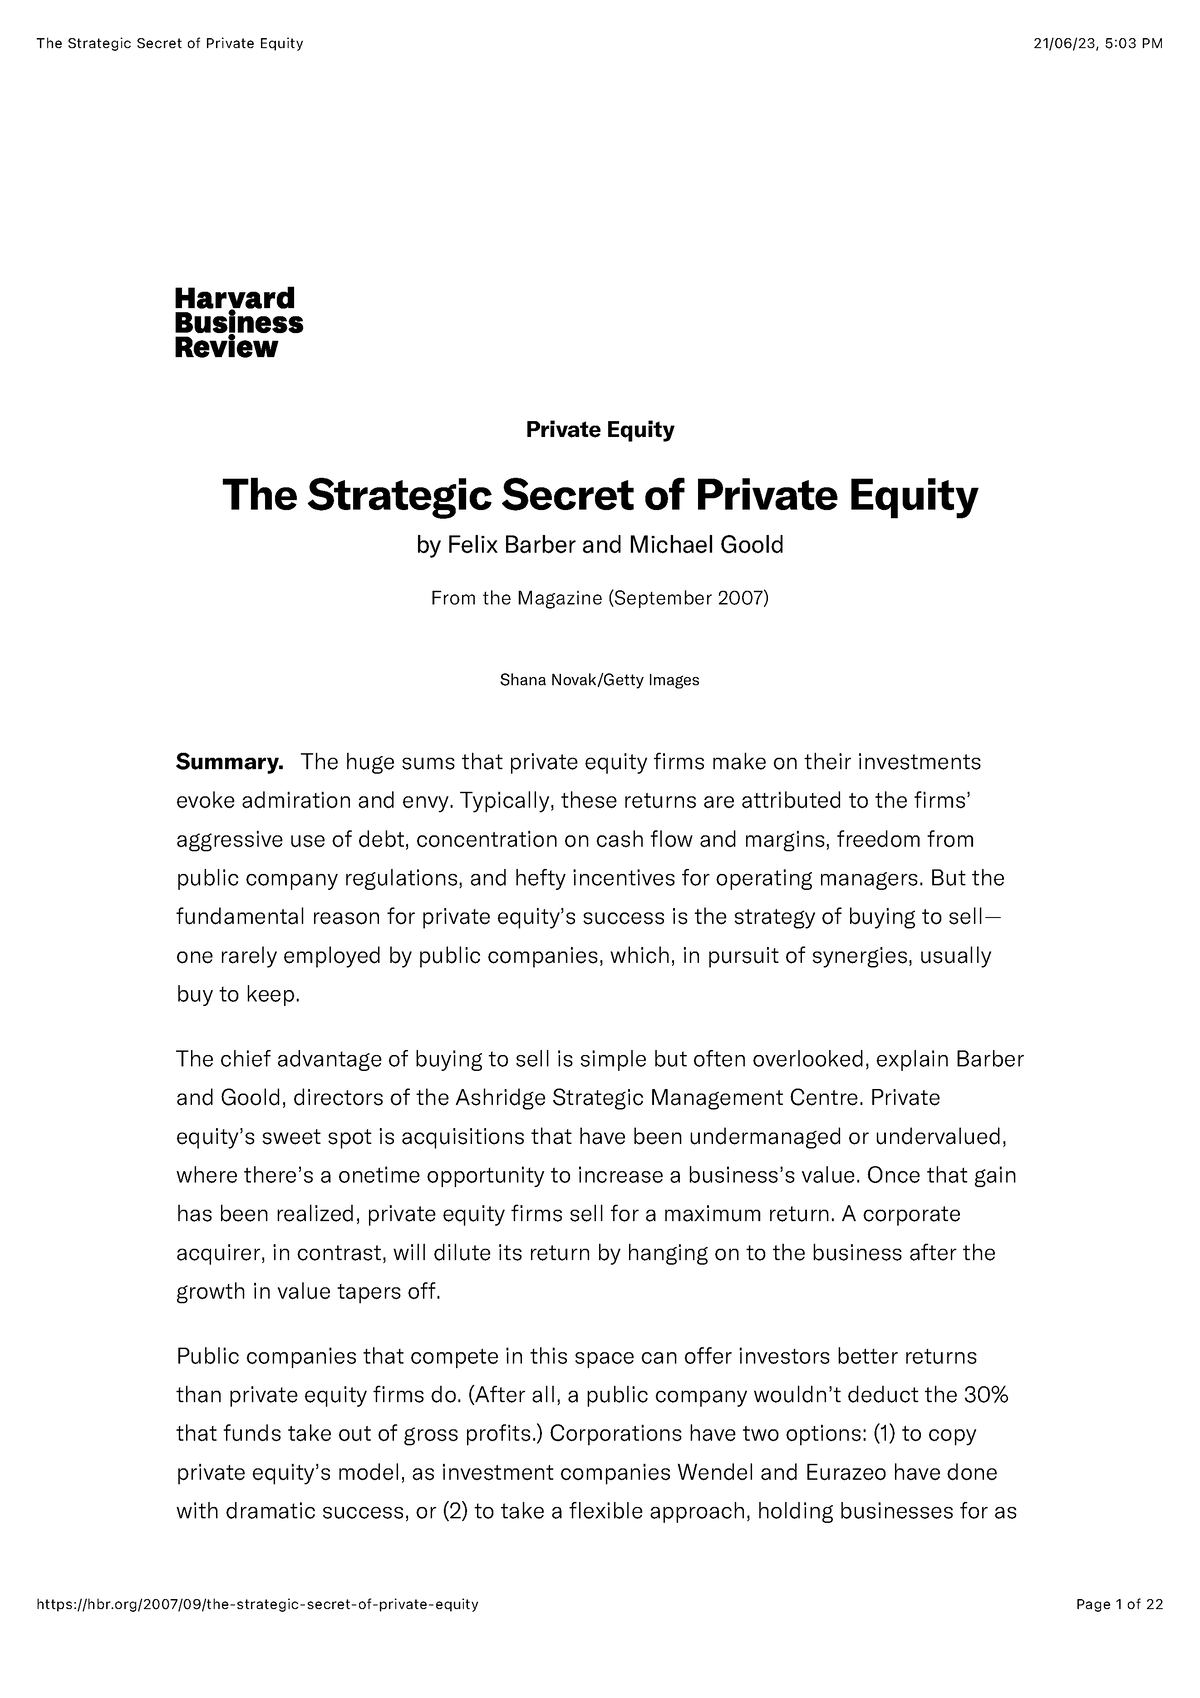 The Strategic Secret of Private Equity